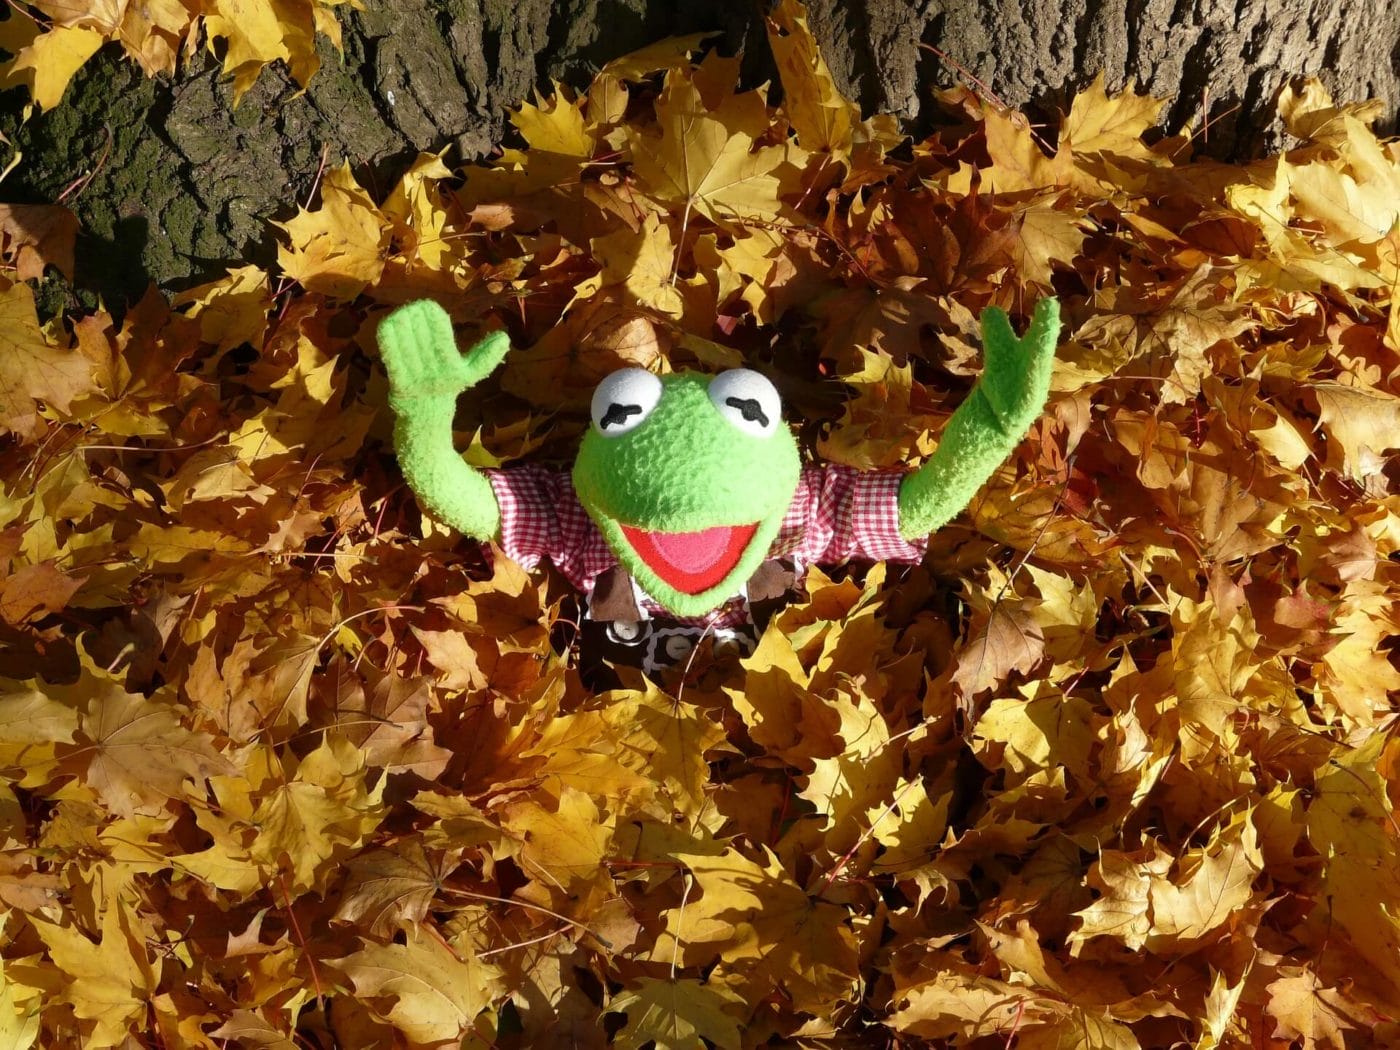 Kermit the frog covered in brown leaves